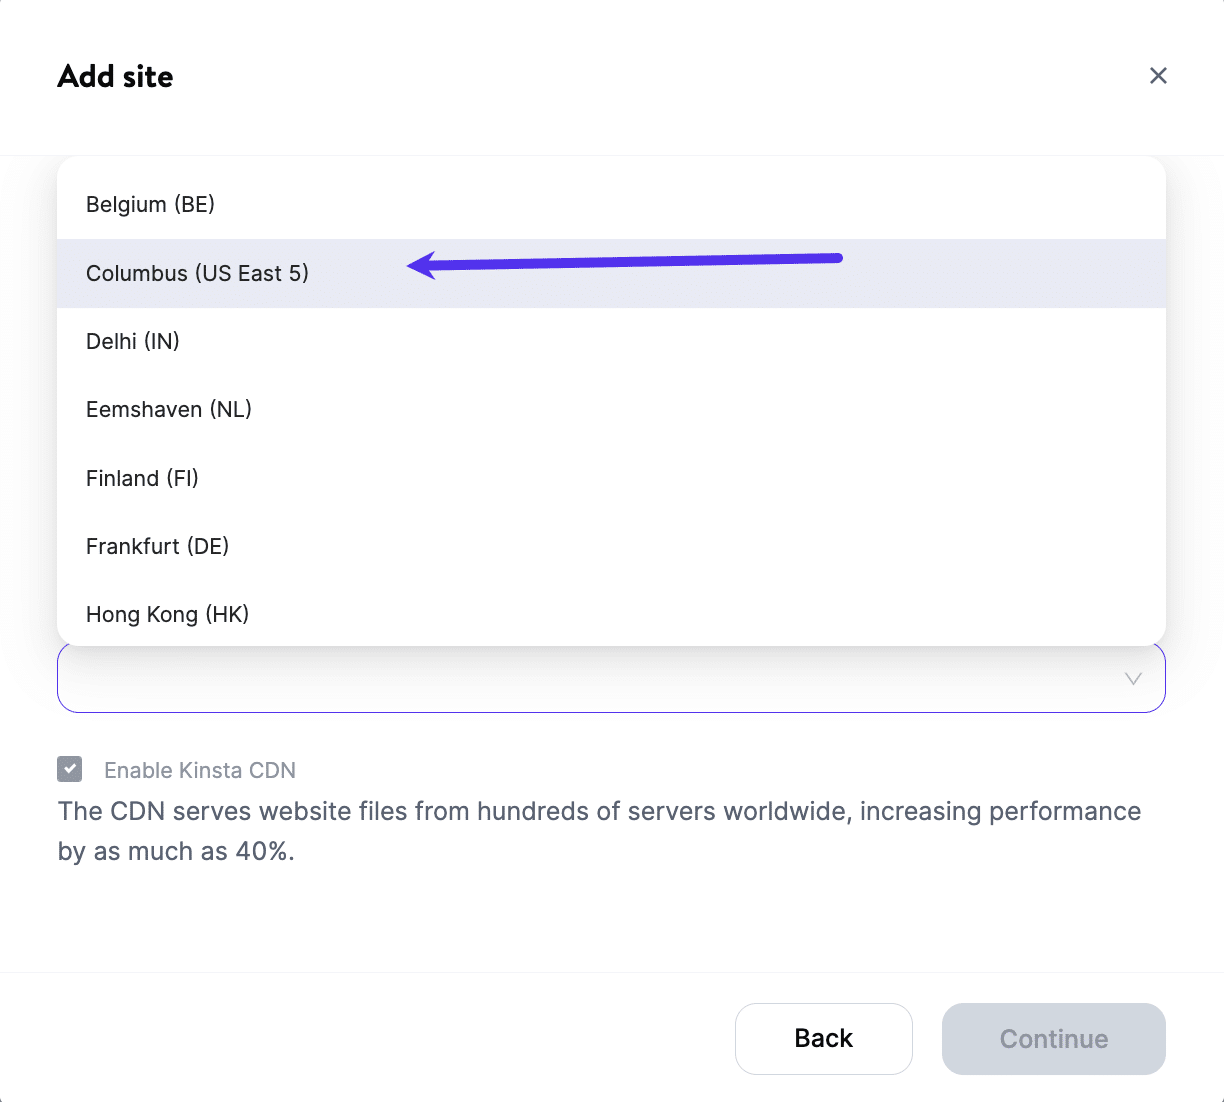 A screenshot of MyKinsta showing the "Add Site" location drop-down set to "Columbus (US East 5)".